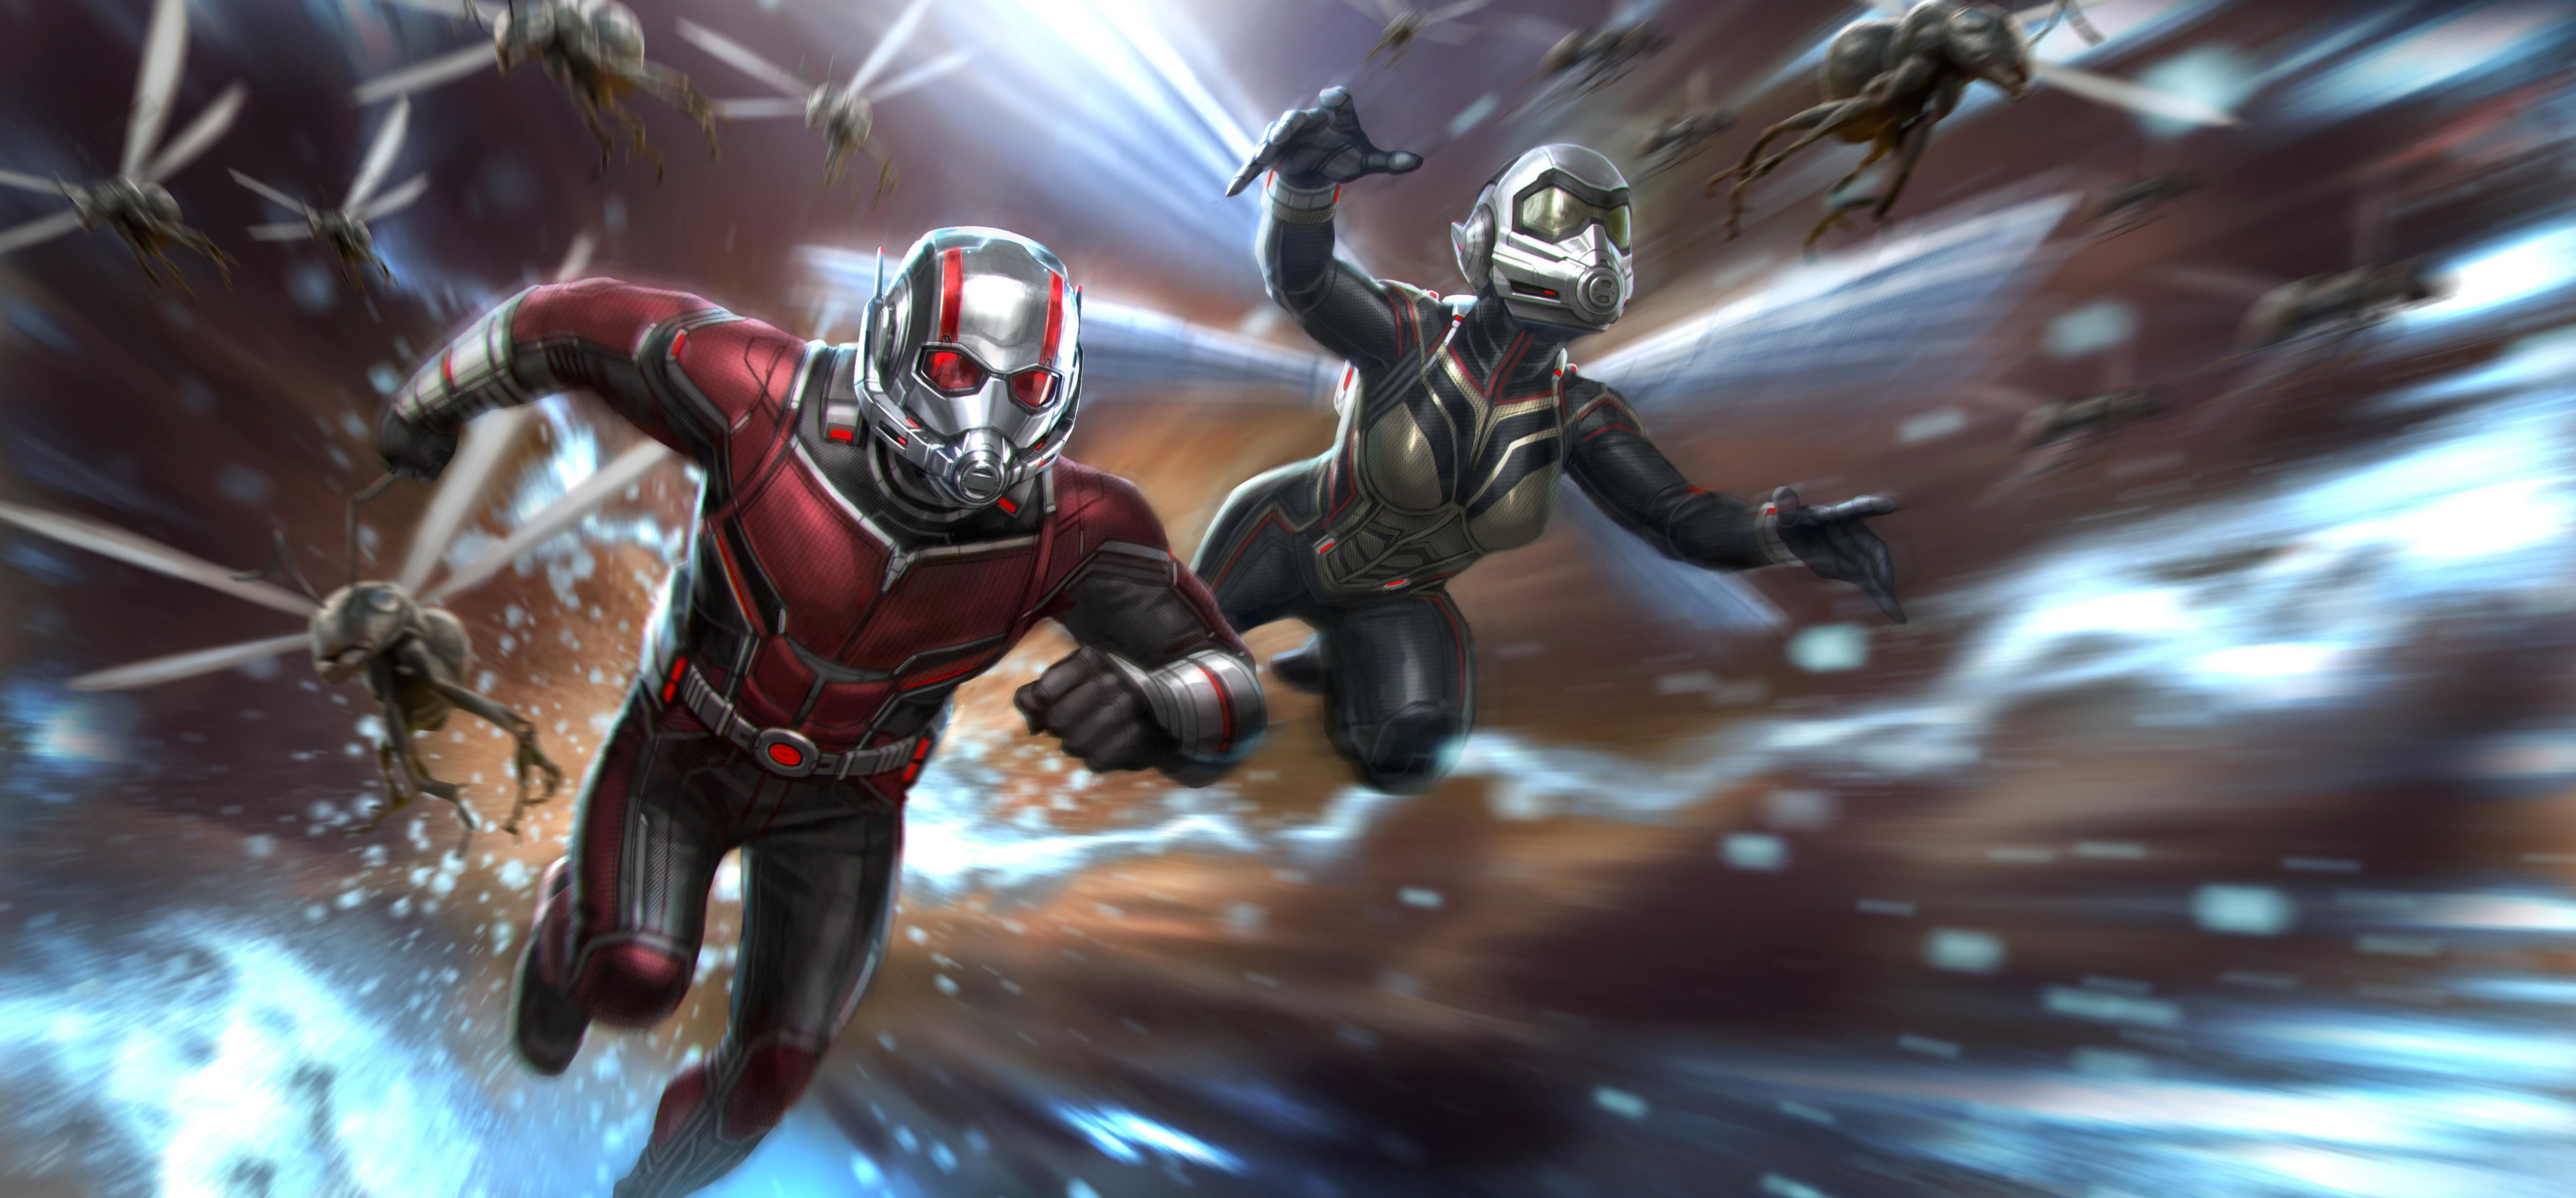 Ant Man And The Wasp 4k Ultra HD Wallpaper Background Image